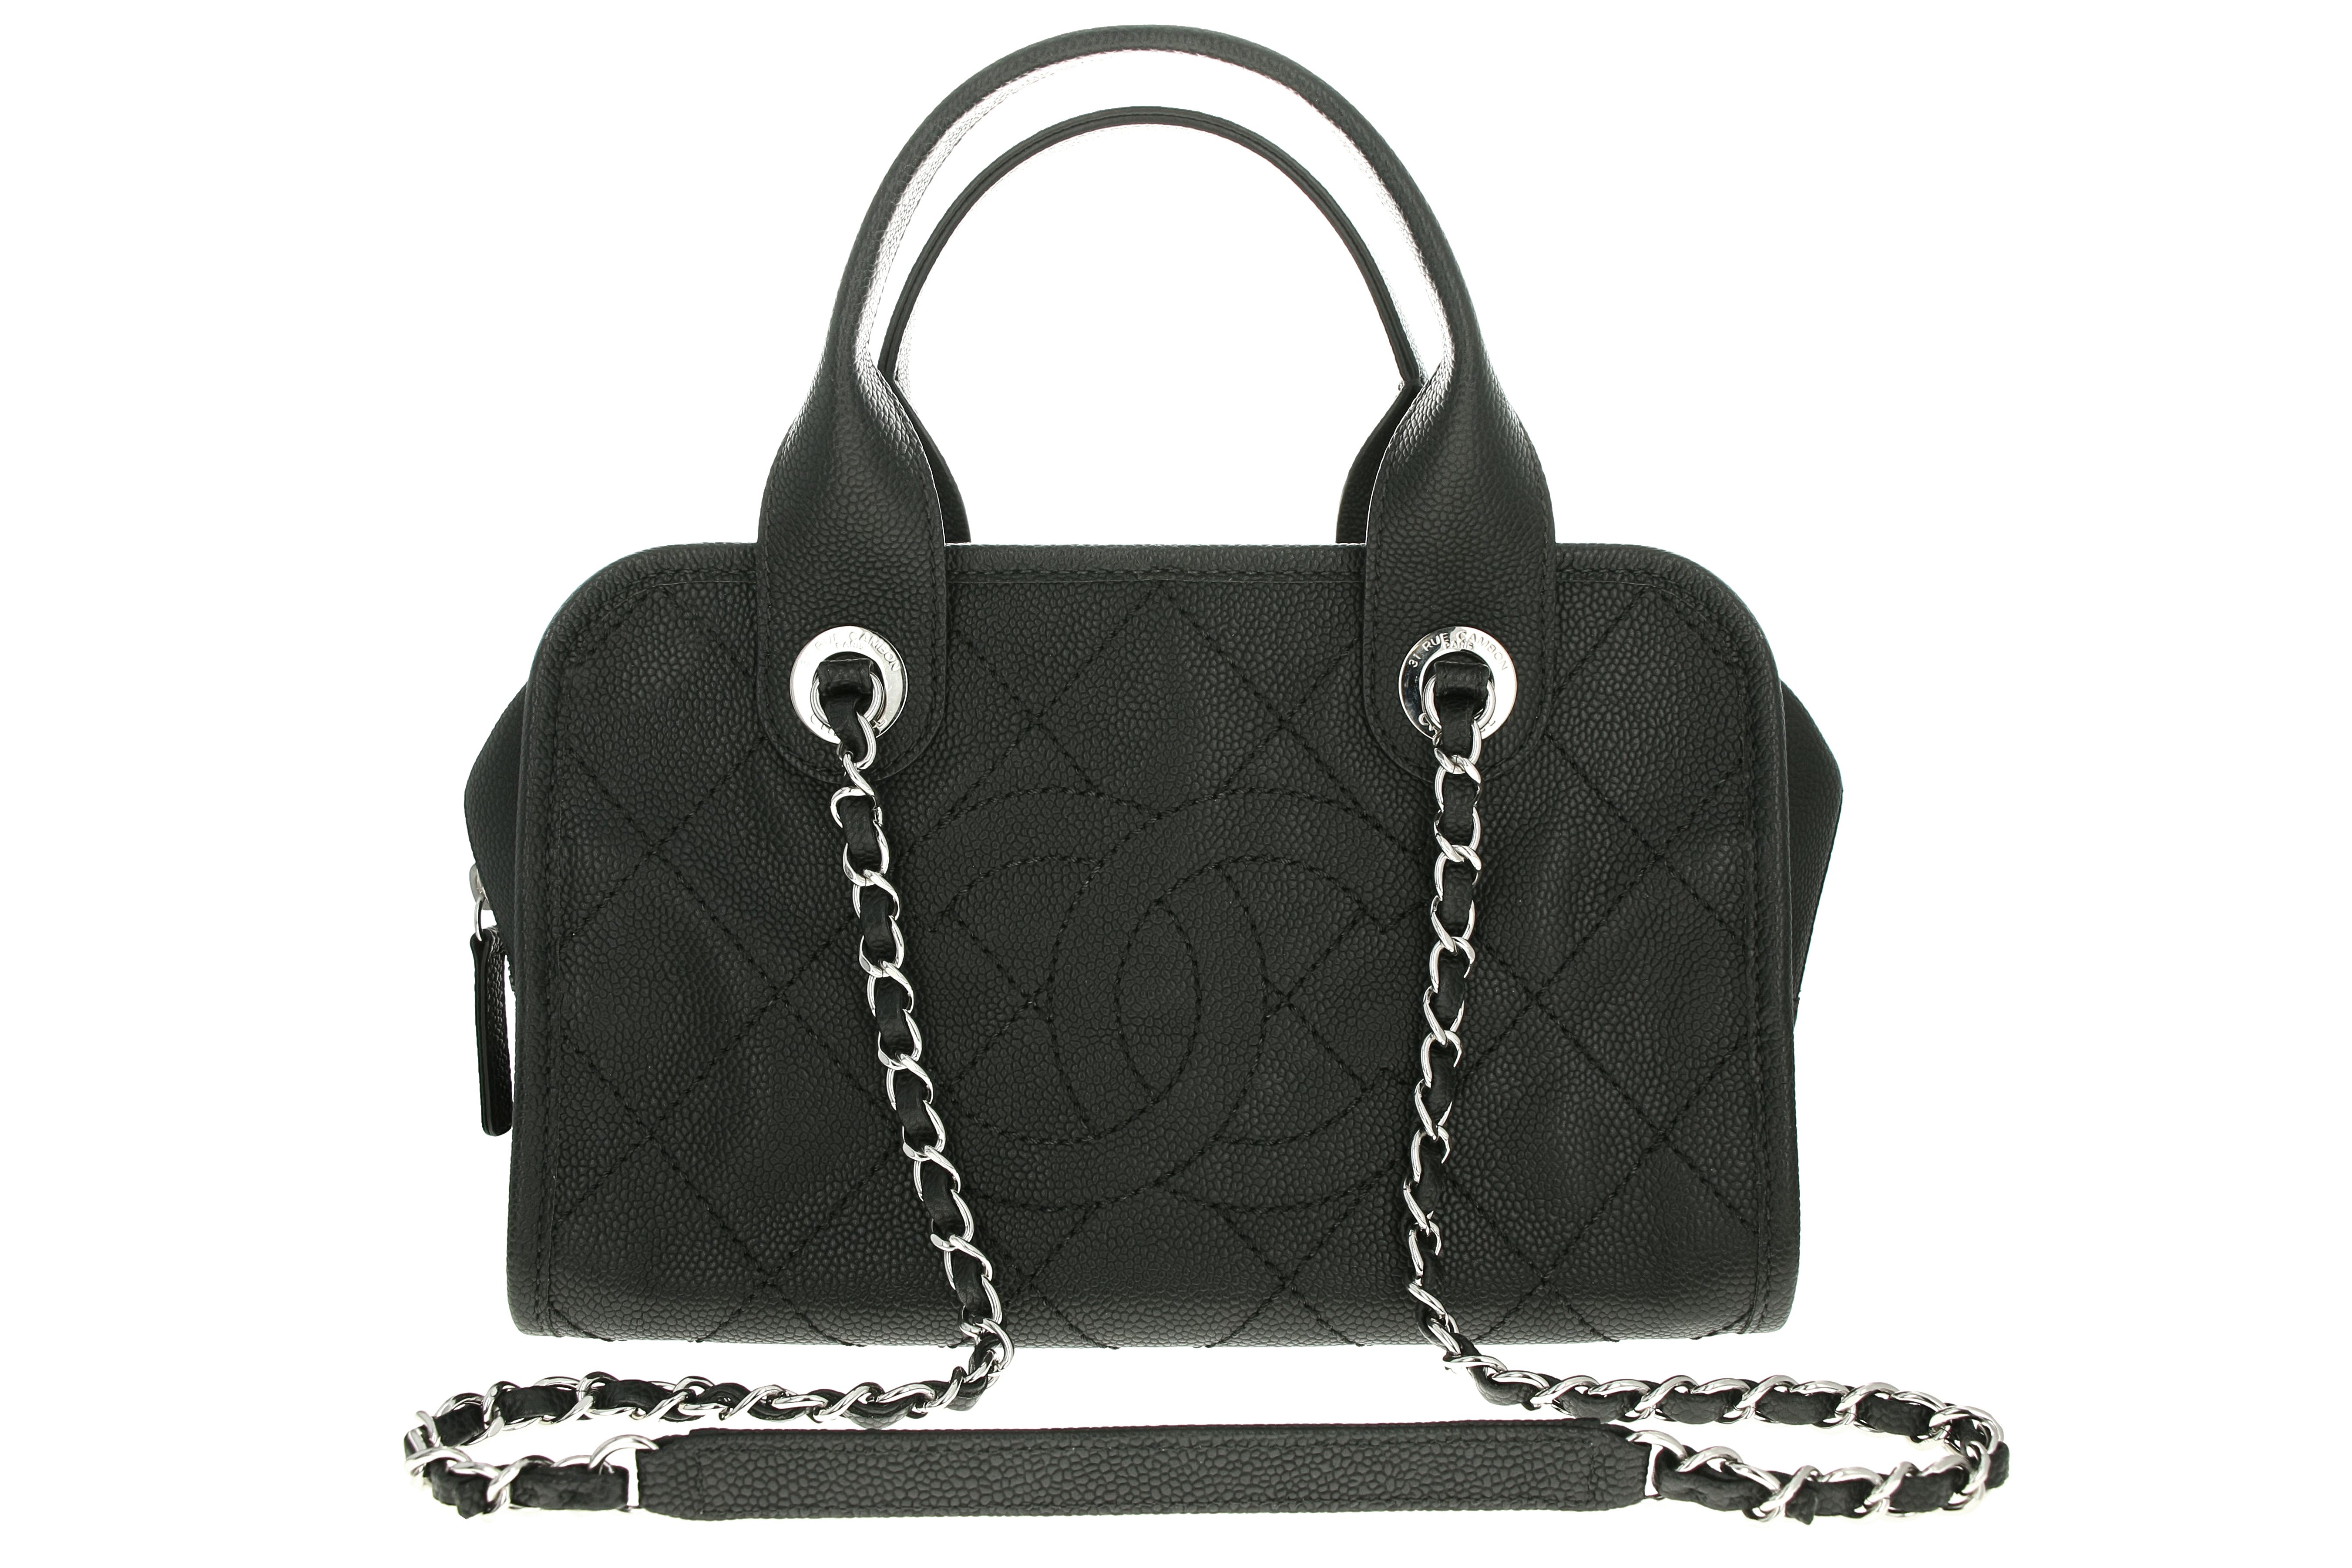 Chanel Black/White Canvas Deauville Large Shopping Tote Bag